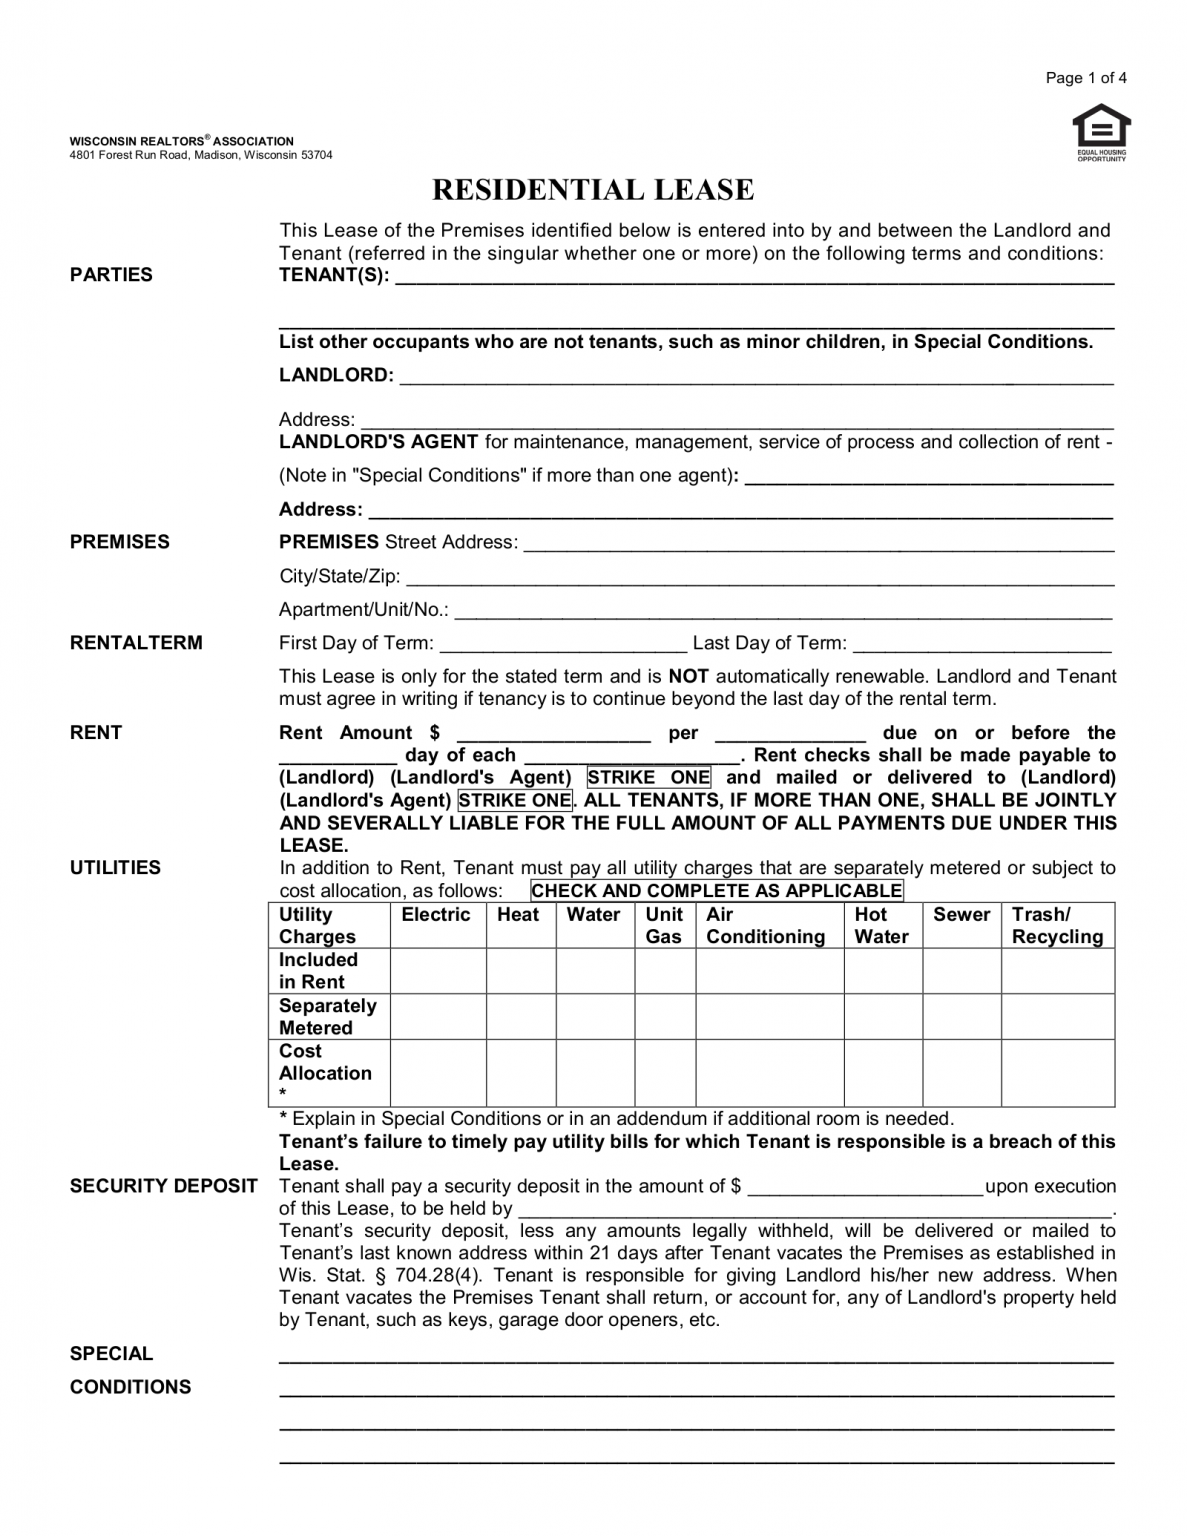 Free Wisconsin Association Of Realtors Residential Lease Agreement 